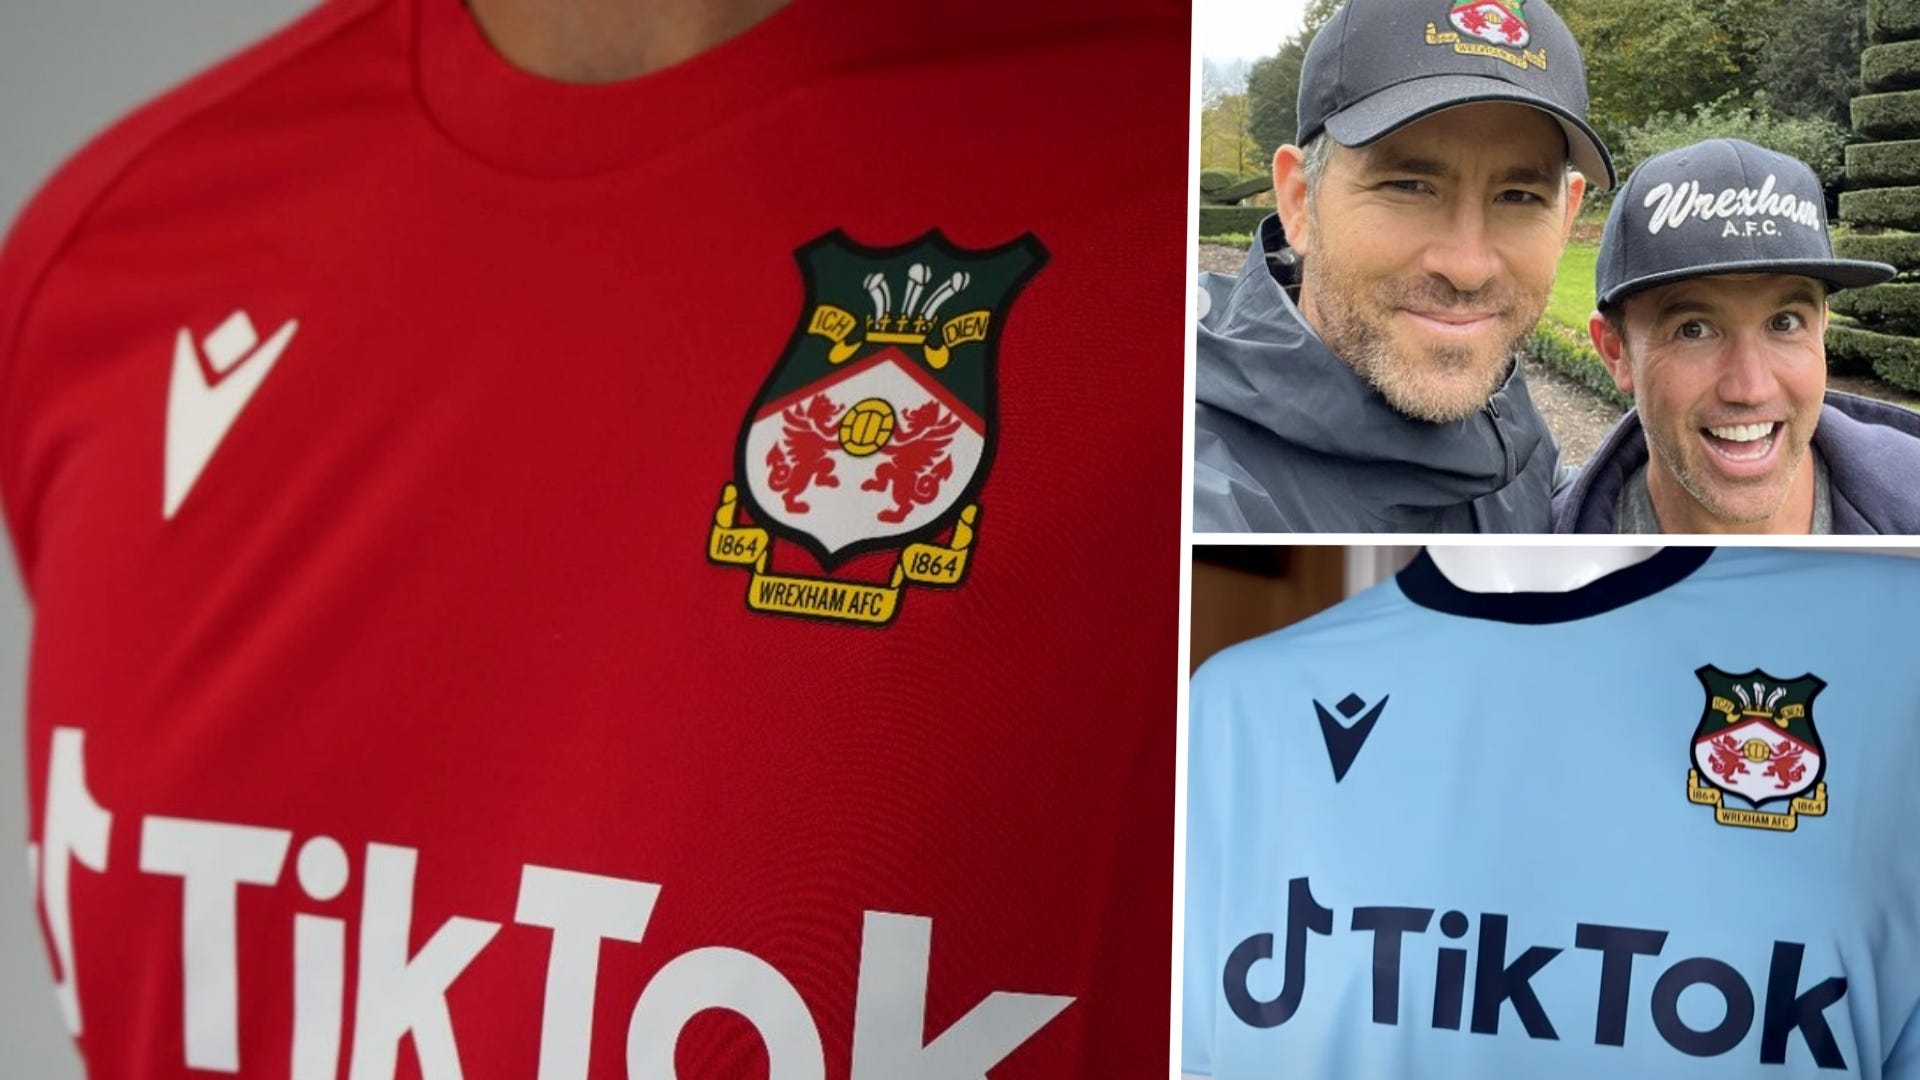 Wrexham kit: Where to buy jerseys, training gear, accessories & prices | Goal.com UK